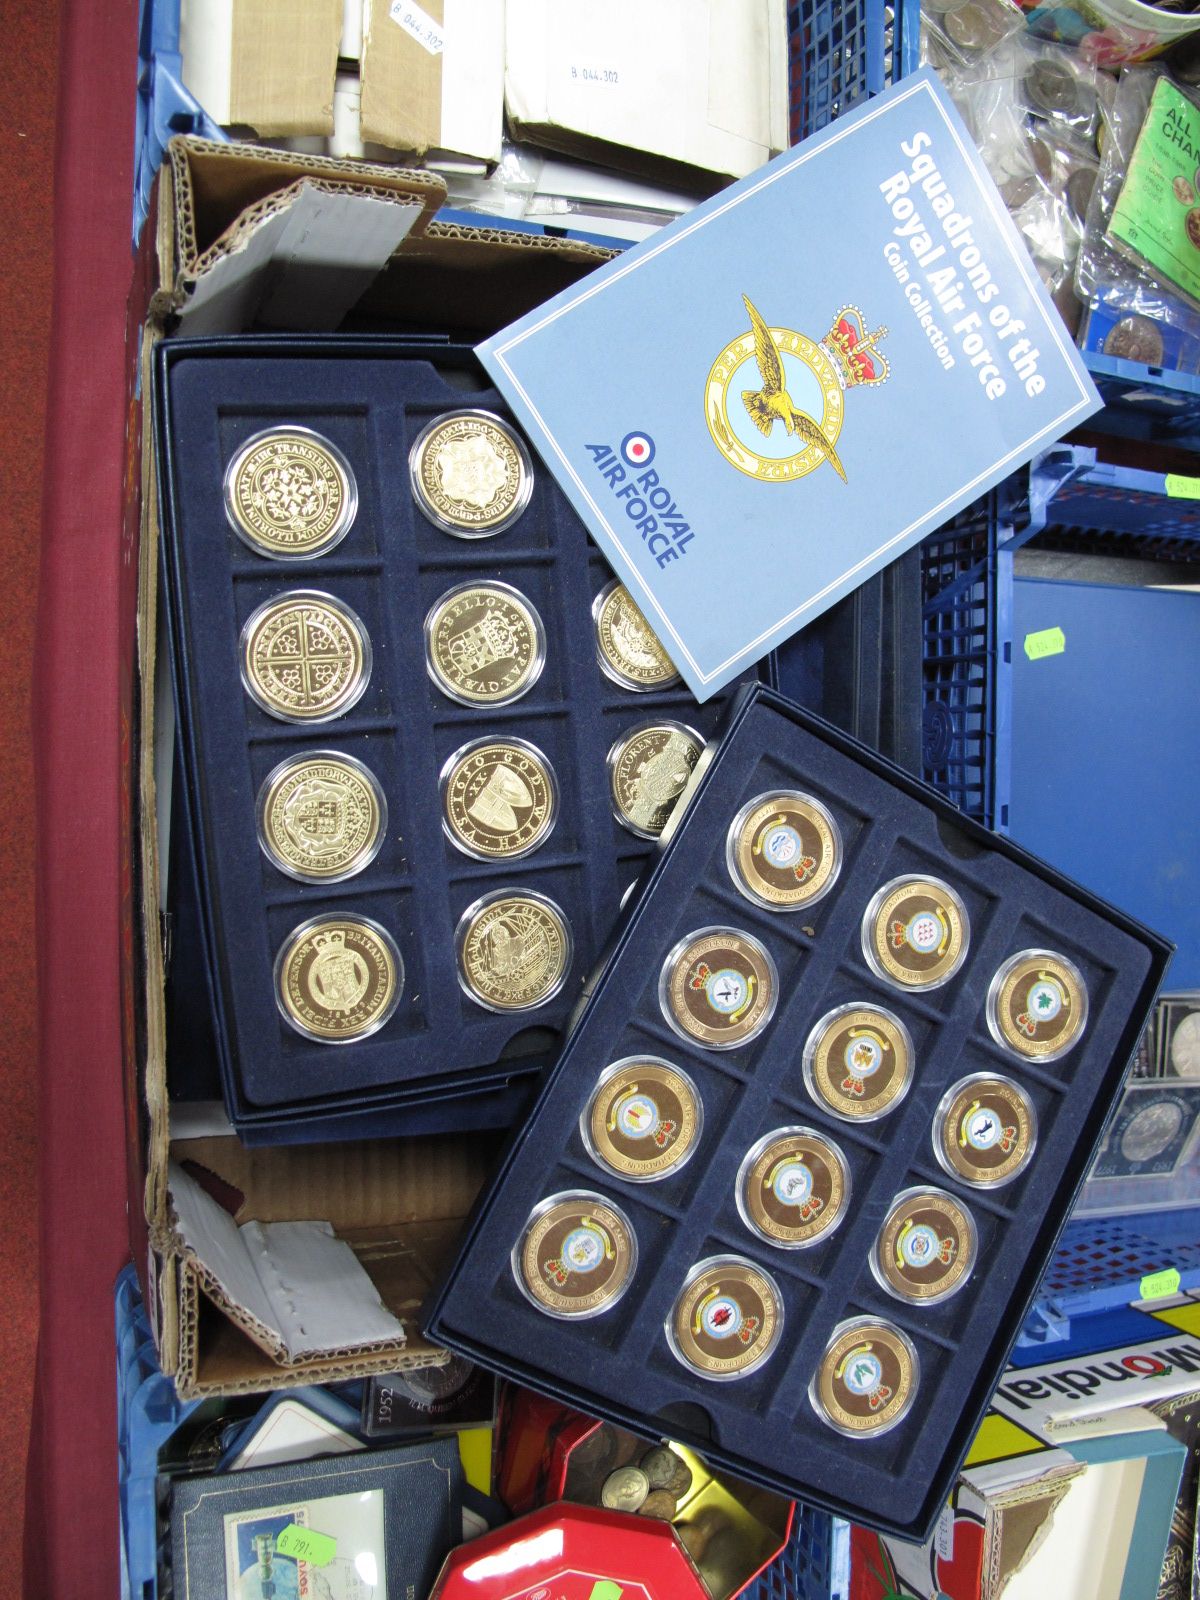 "Squadron of the Royal Air Force". An Attractive Collection of Gold on Copper 'Coins' by